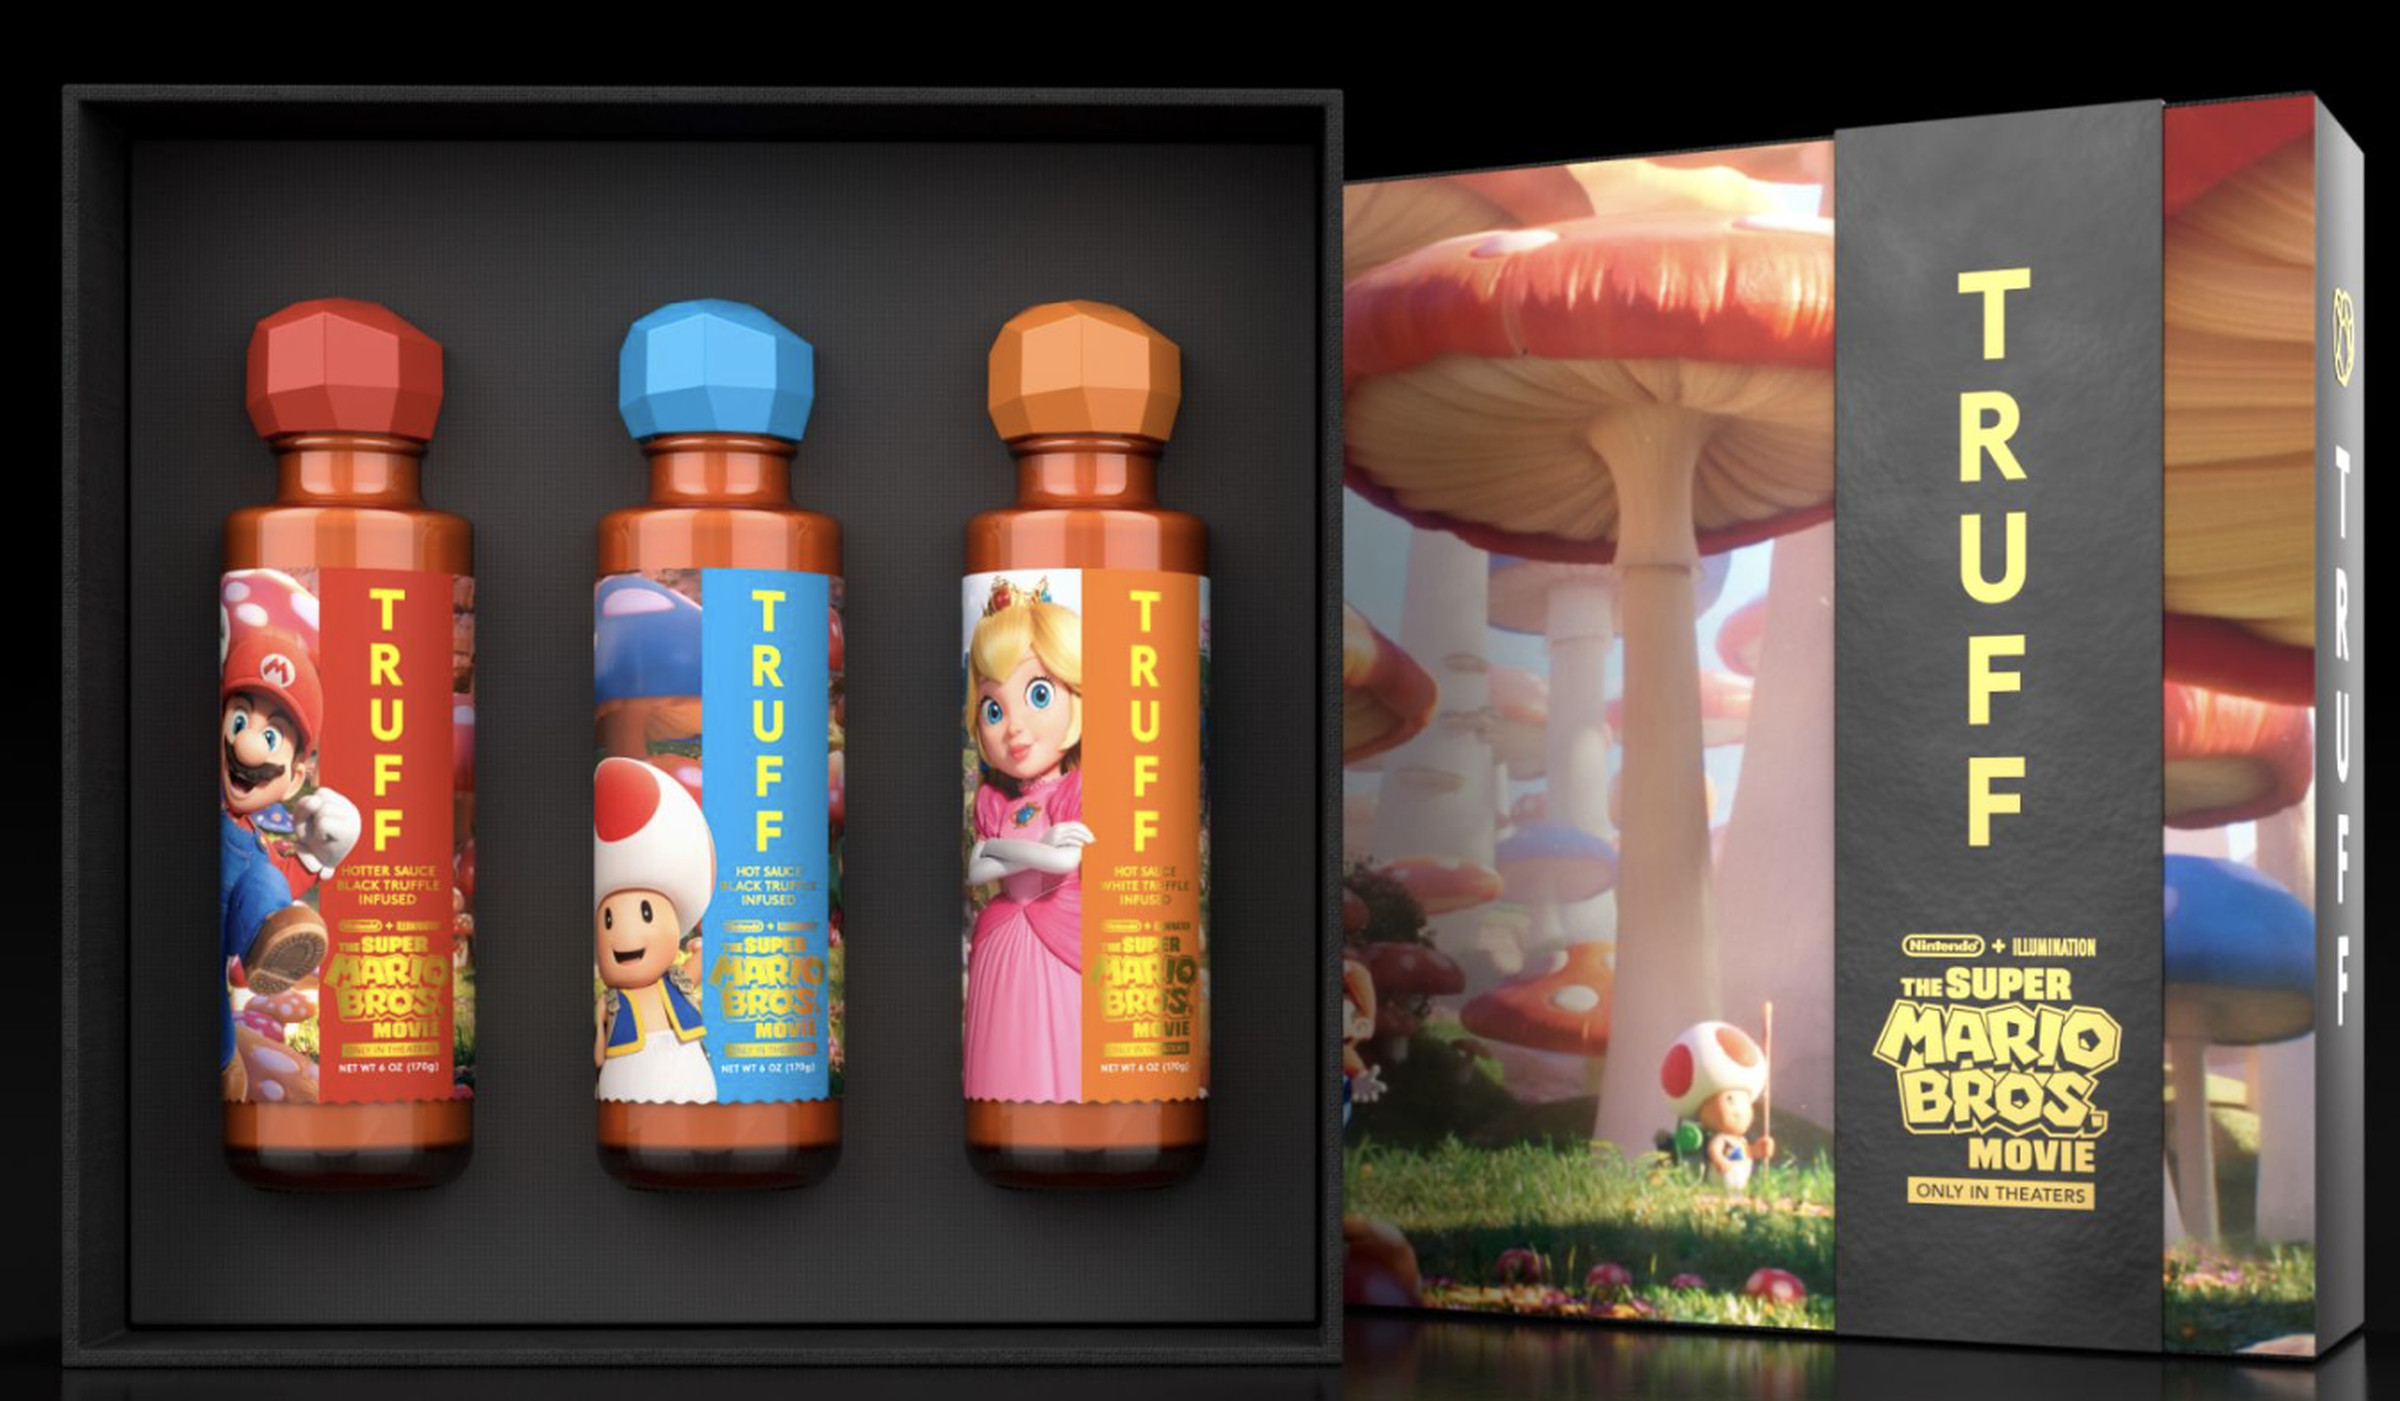 Three bottles of hot sauce that are topped with caps resembling the mushrooms in the Mario games.